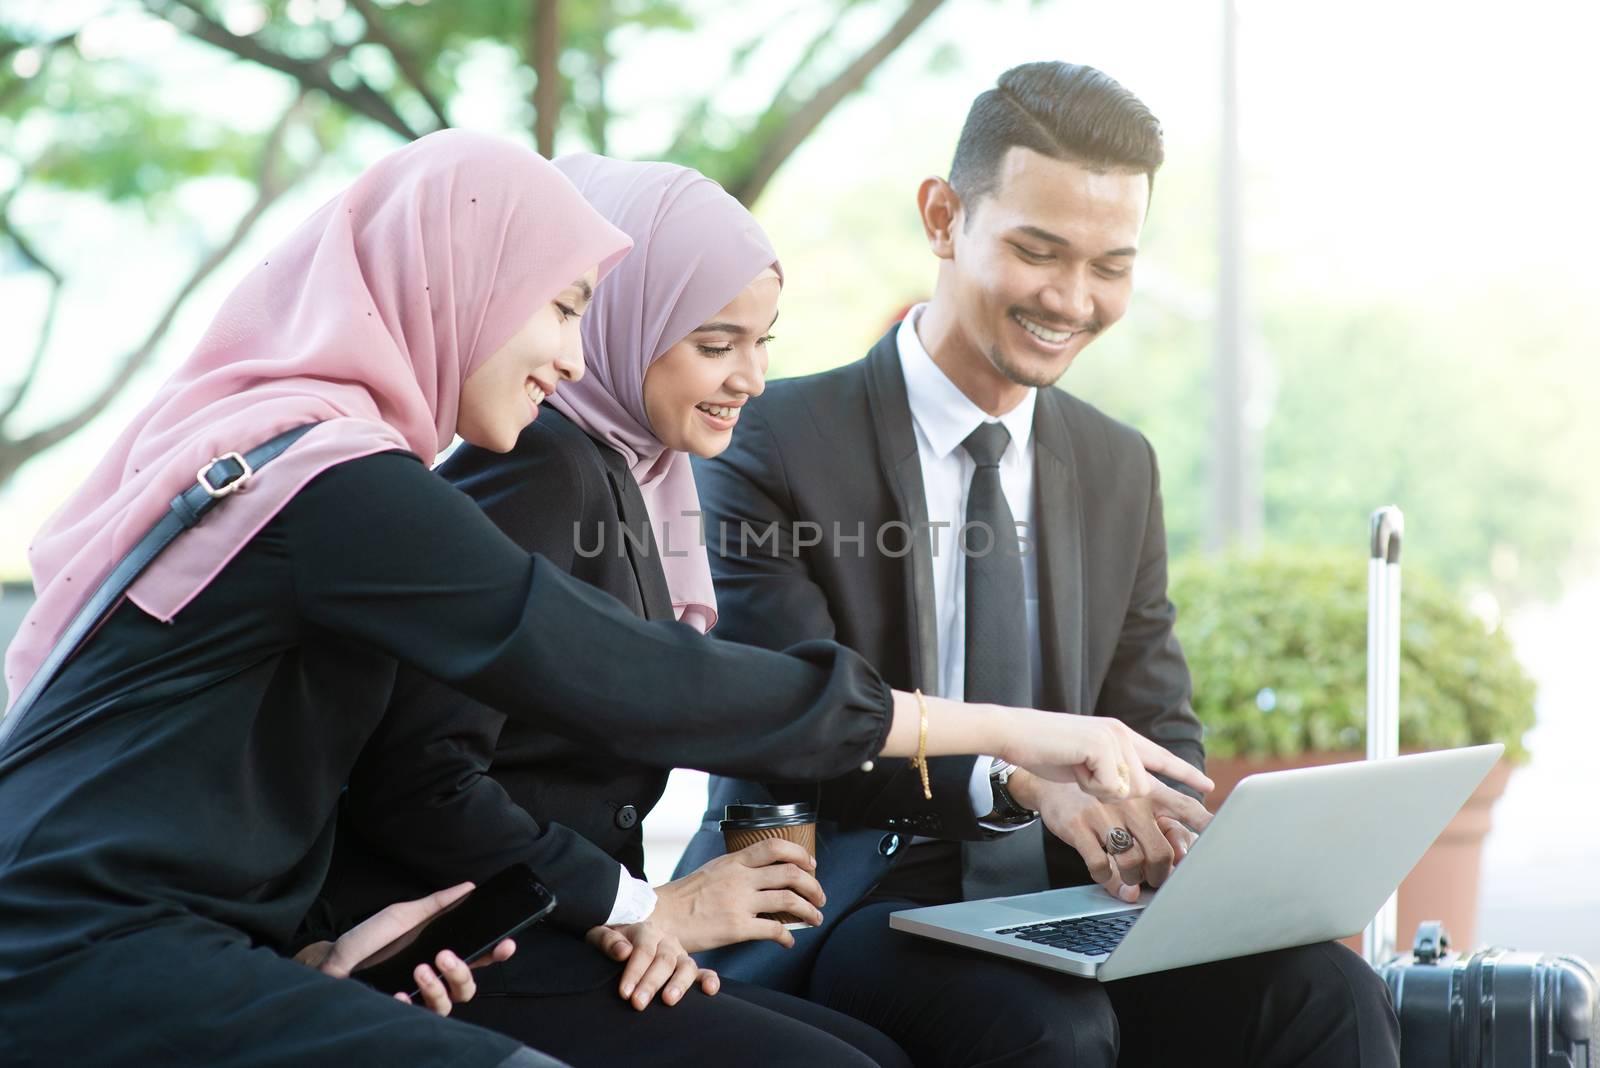 Muslim business people discussion with laptop, outdoor. 